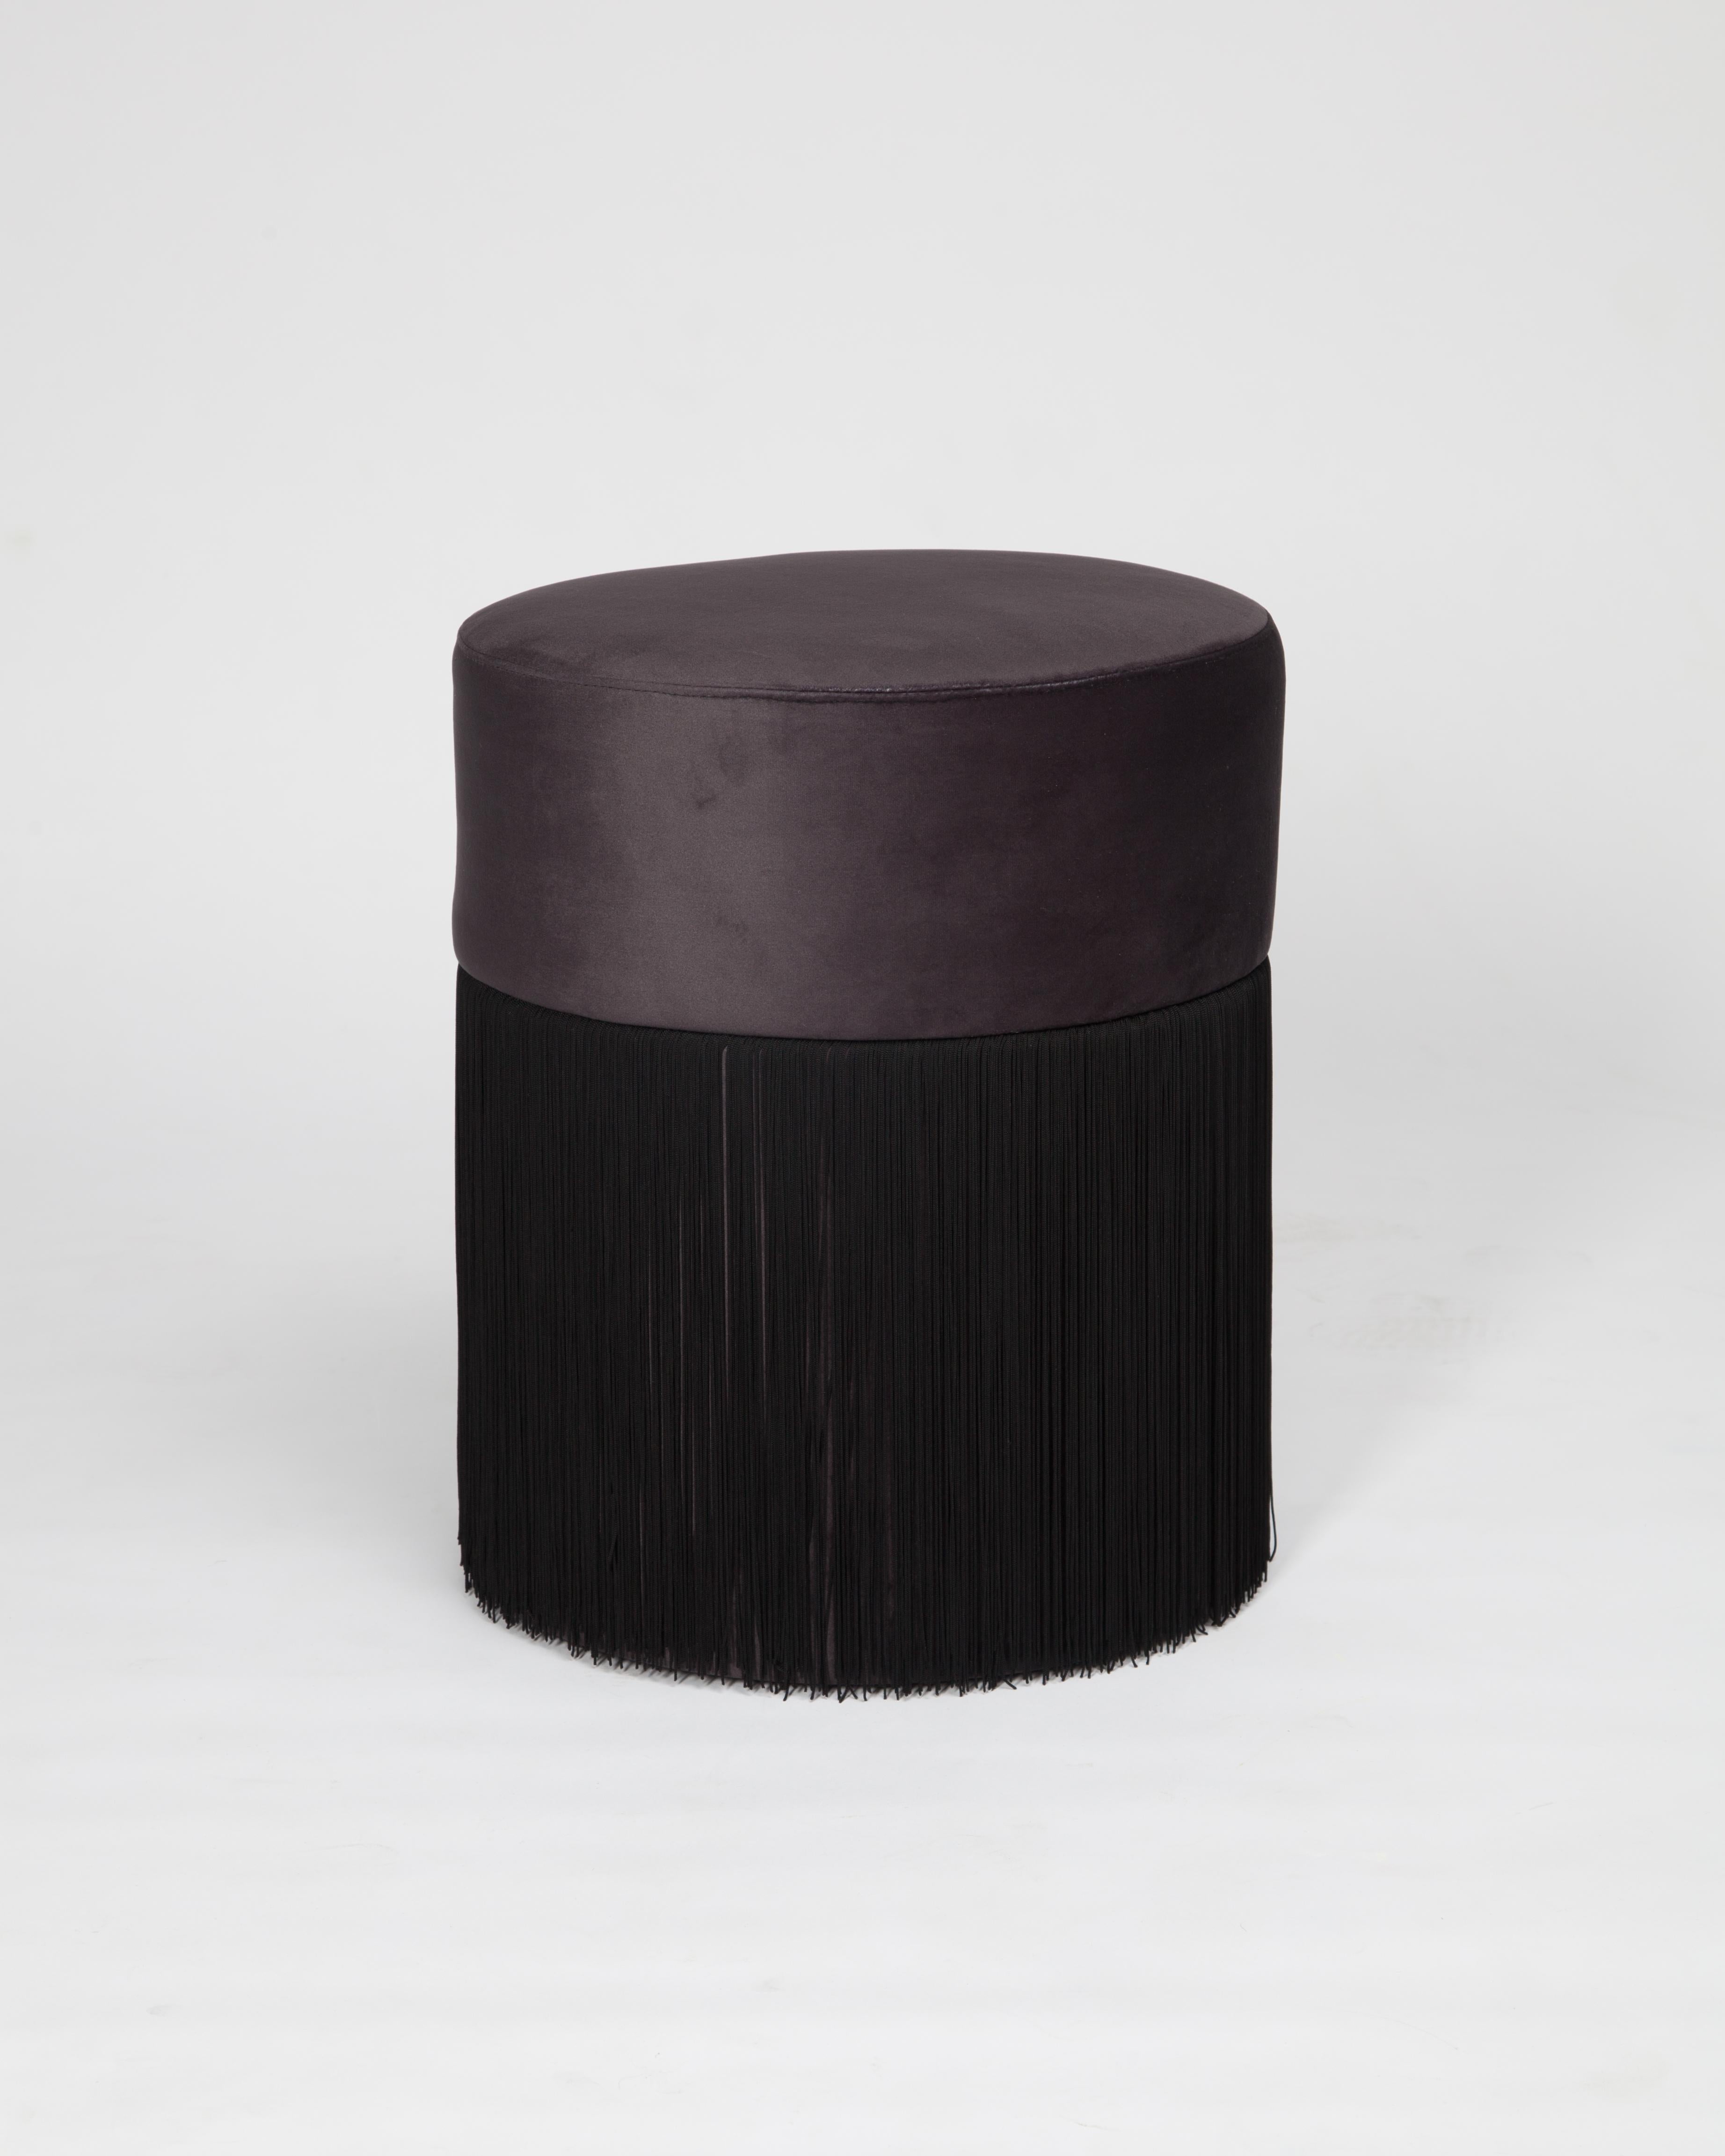 Pouf pill S by Houtique
Dimensions: H 45 x D 35 cm
Materials: Velvet upholstery and 30cm fringes

Pill Pouf S
Art Deco style pouf with wood structure and velvet fabric.
2 fiber-board discs of 16mm, joined by wooden tufts.
Upholstery Velvet